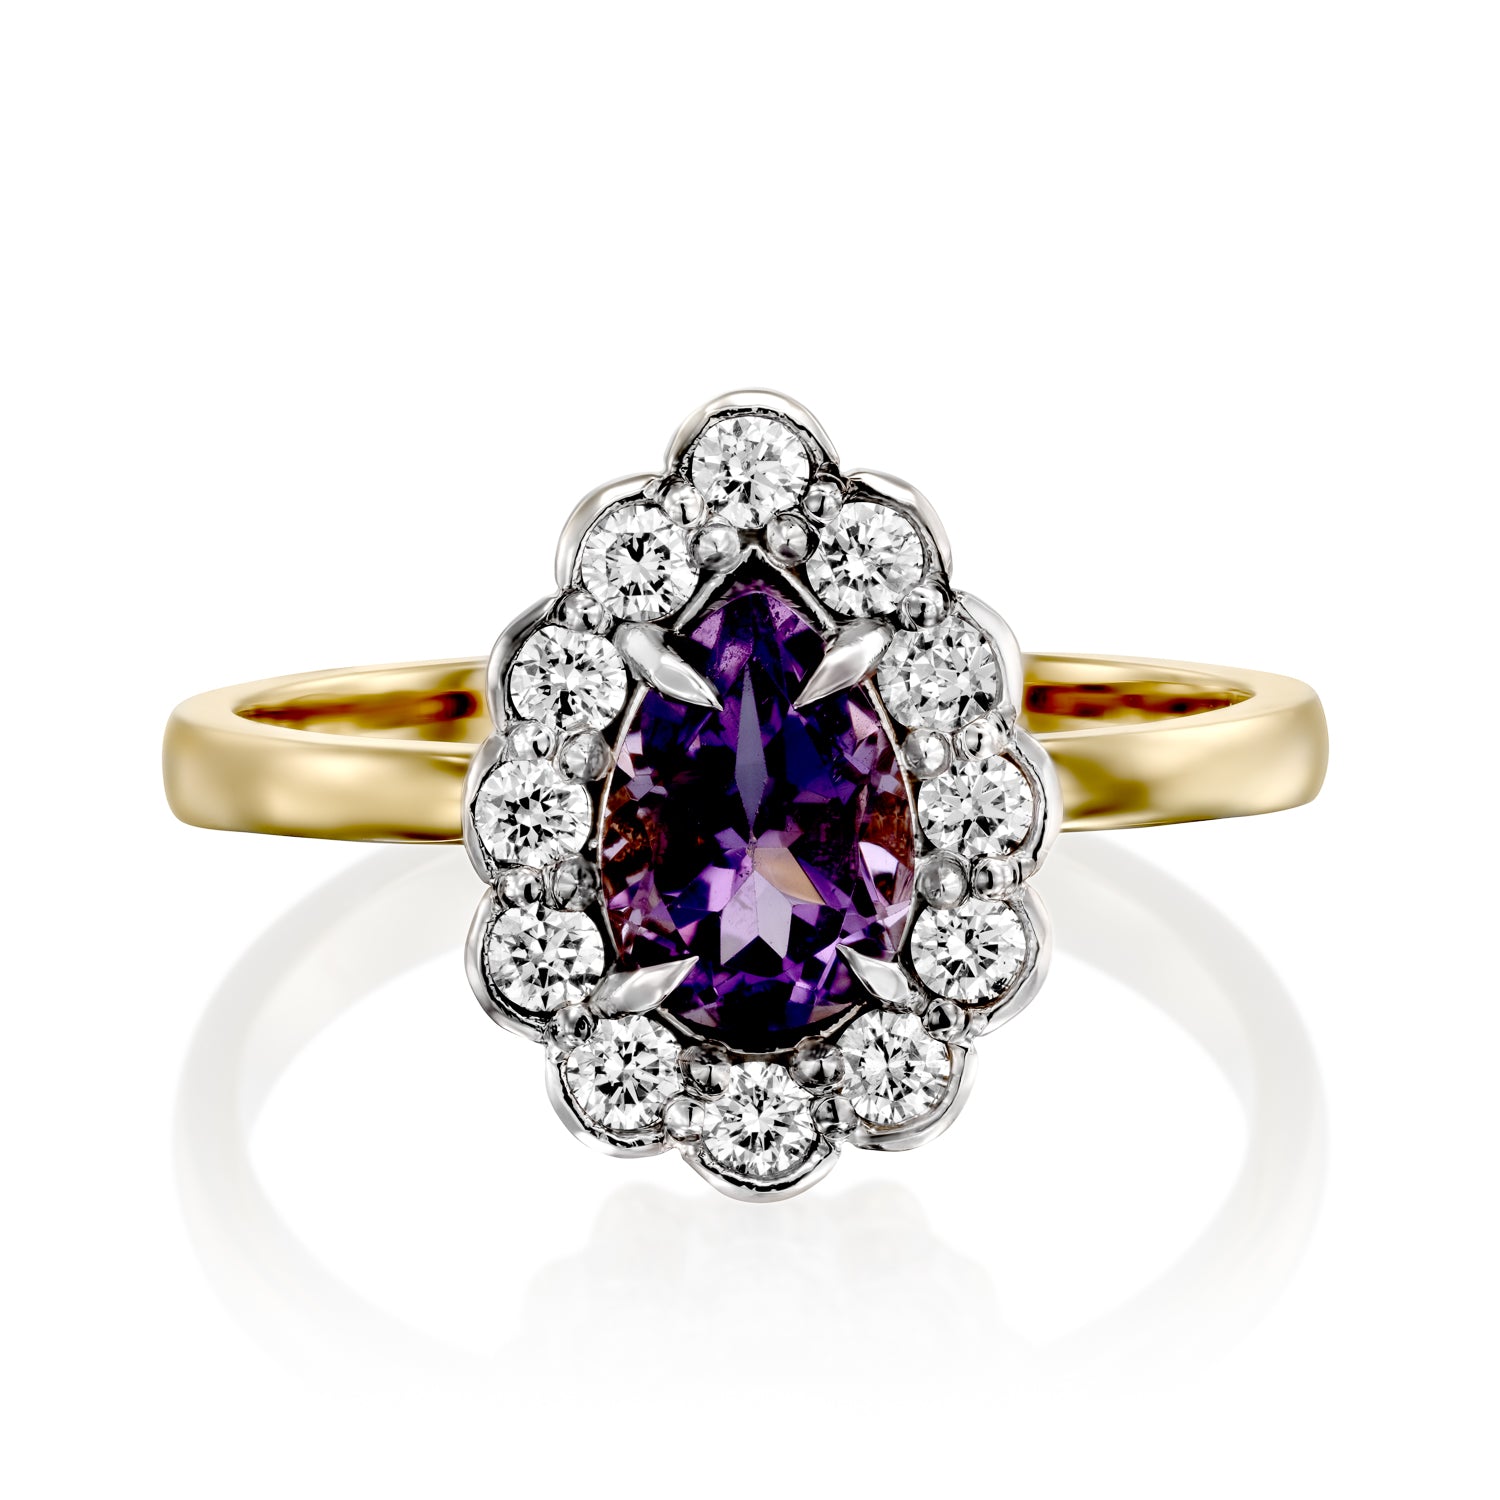 Marie Antoinette Ring With Amethyst